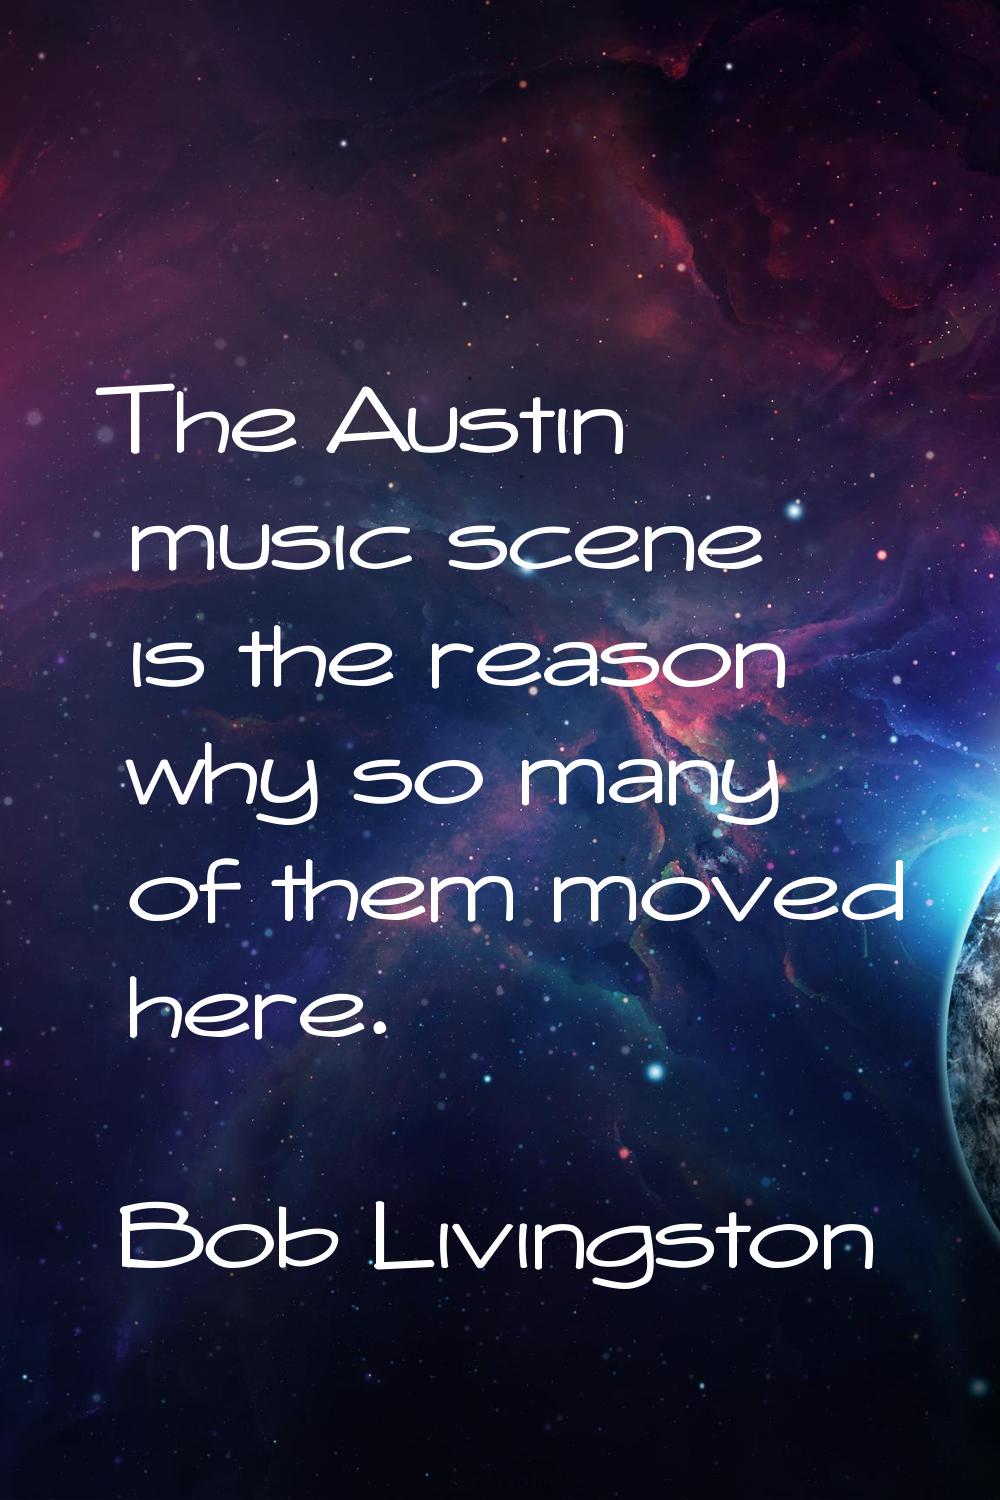 The Austin music scene is the reason why so many of them moved here.